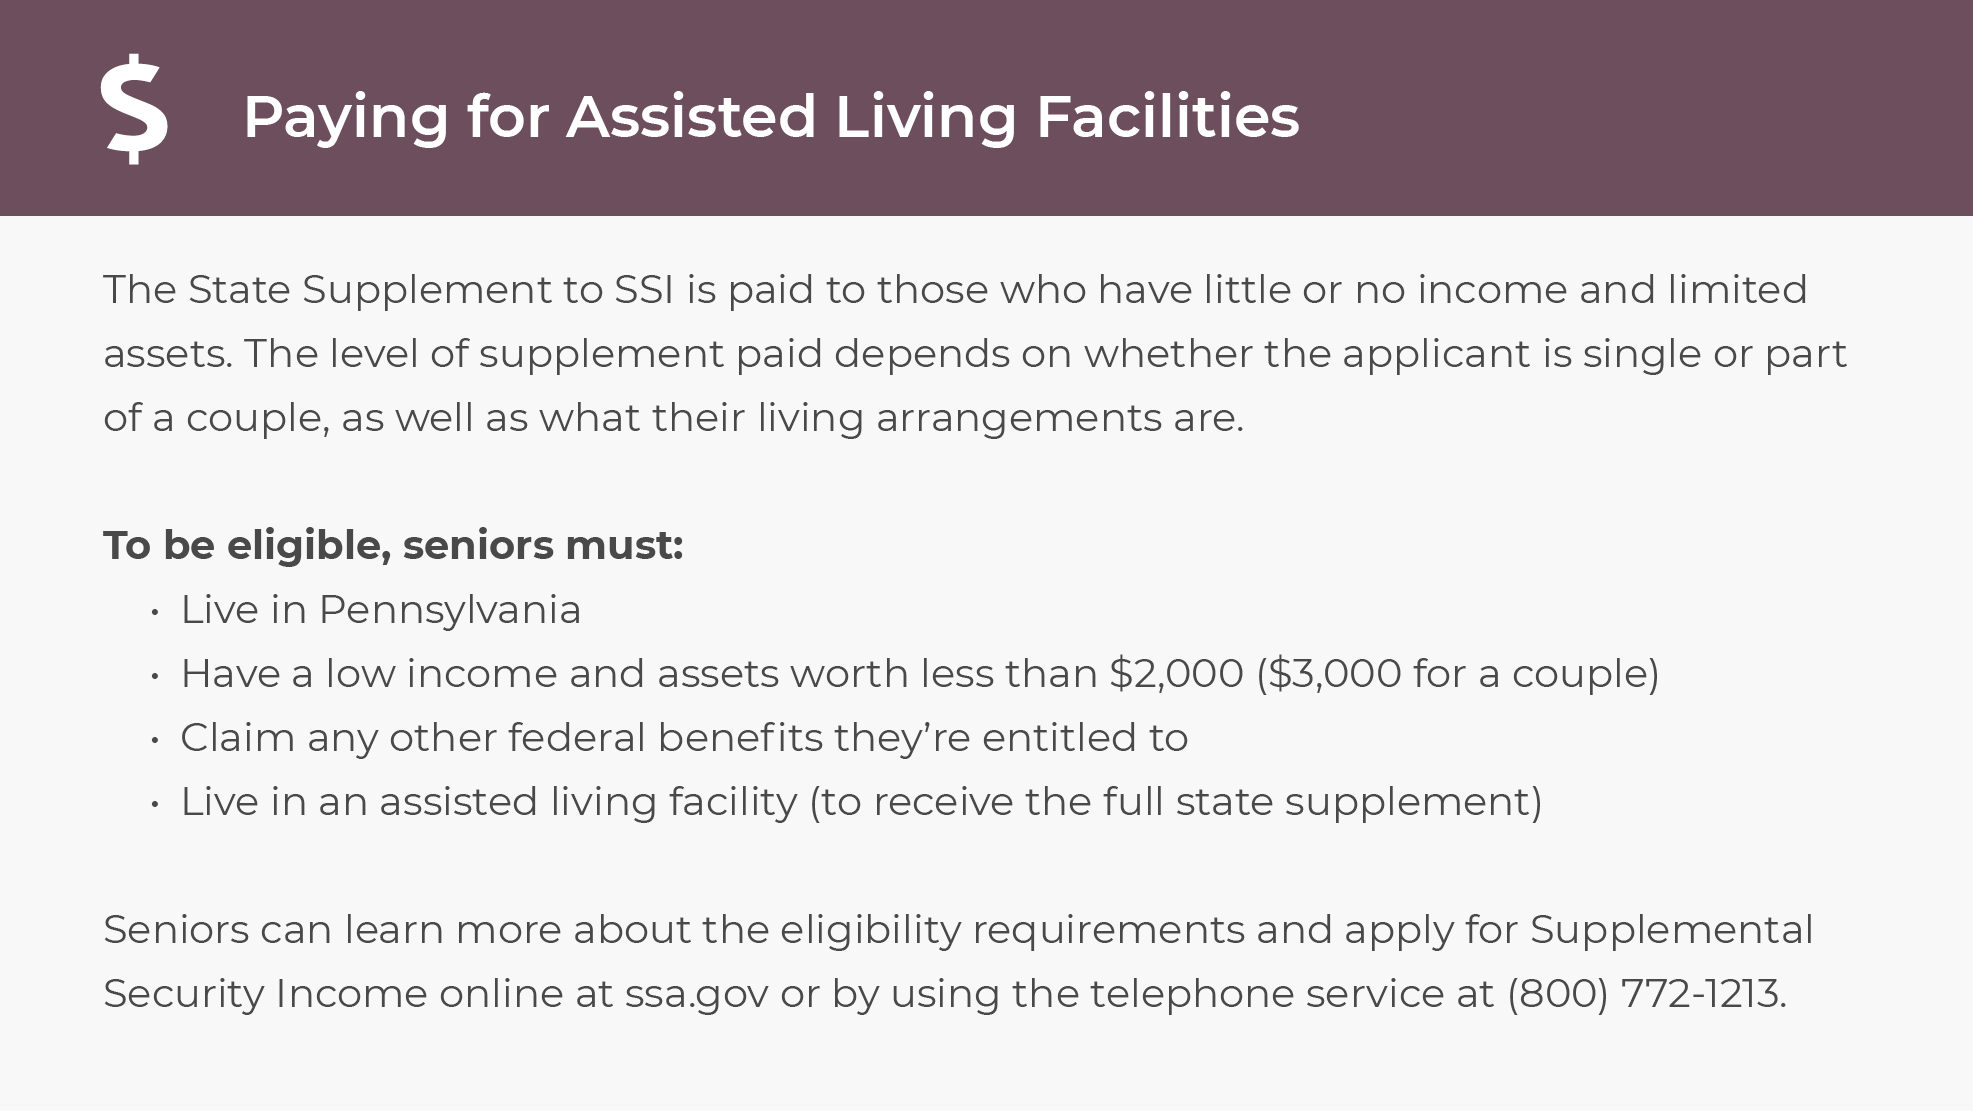 Paying for assisted living facilities in Pennsylvania